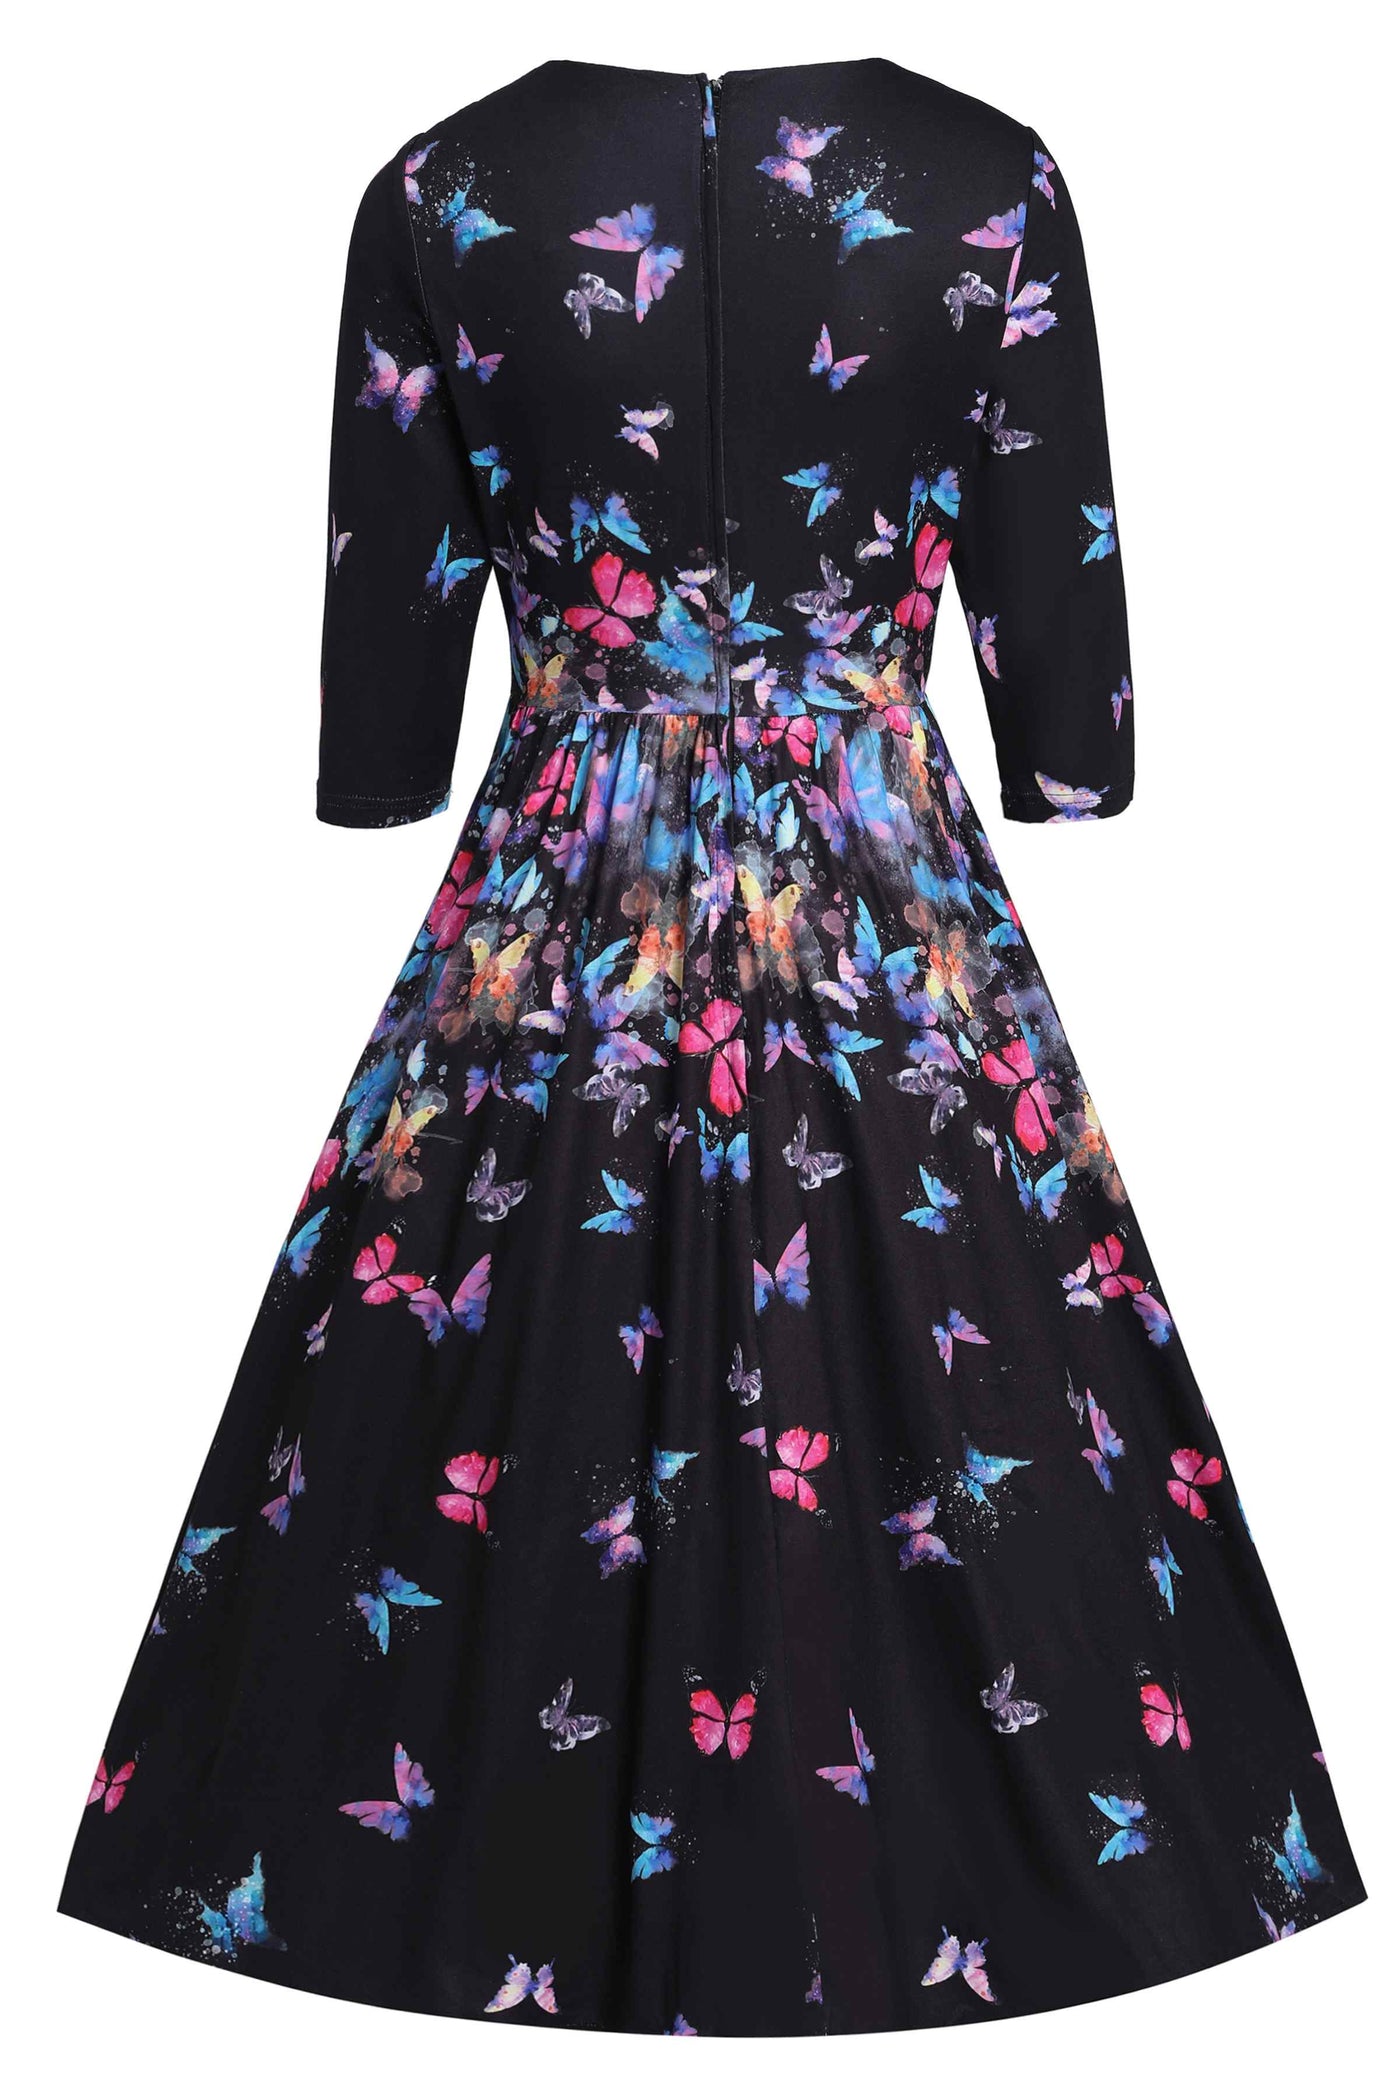 Back View of Butterfly Print Long Sleeved Swing Dress in Black